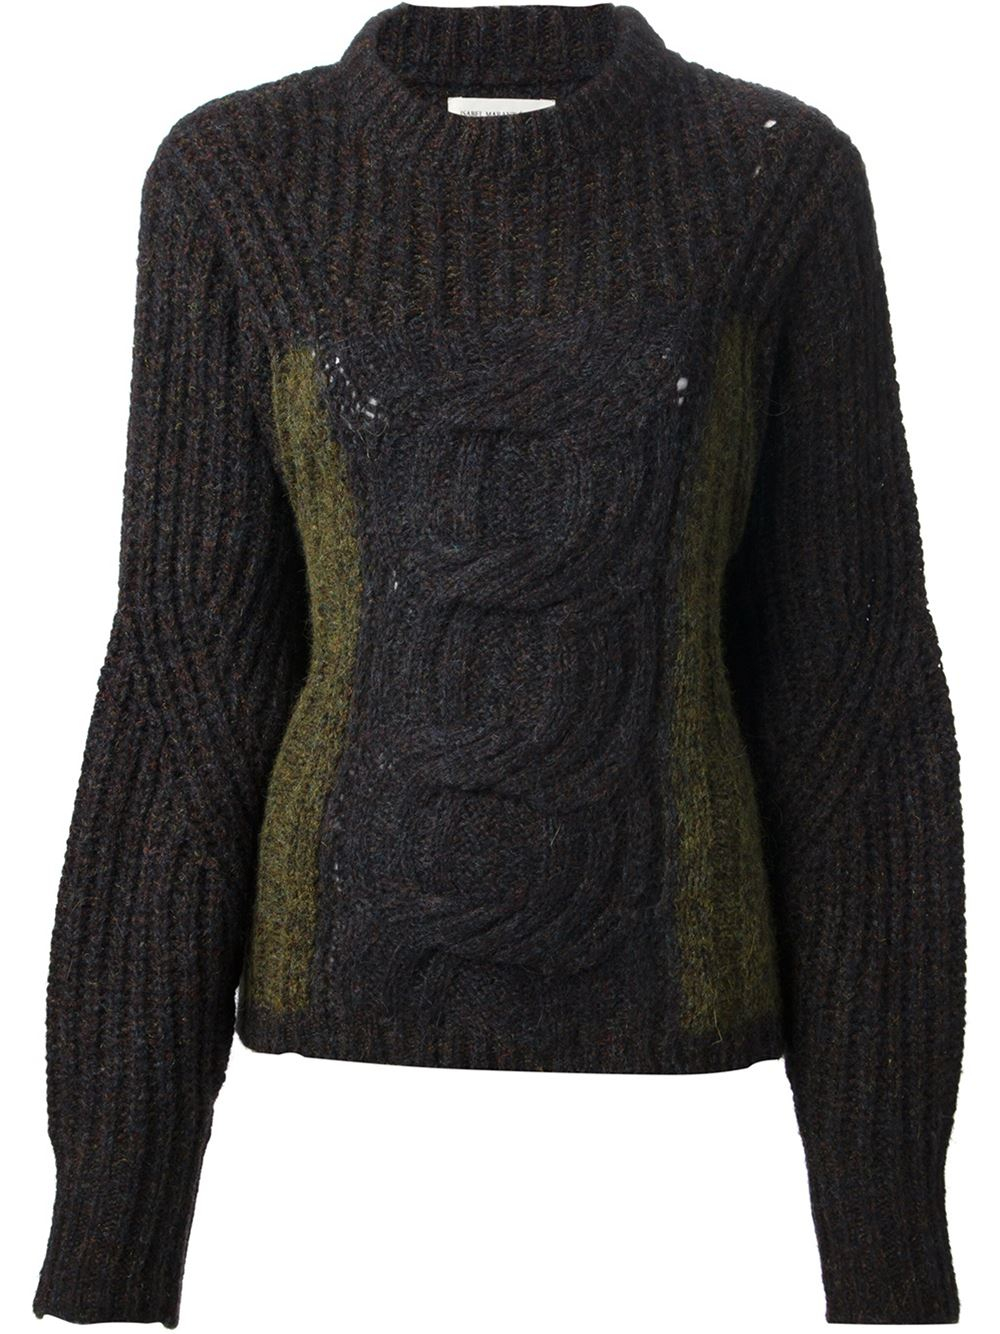 Étoile Isabel Marant Cable Knit Sweater in Green - Lyst